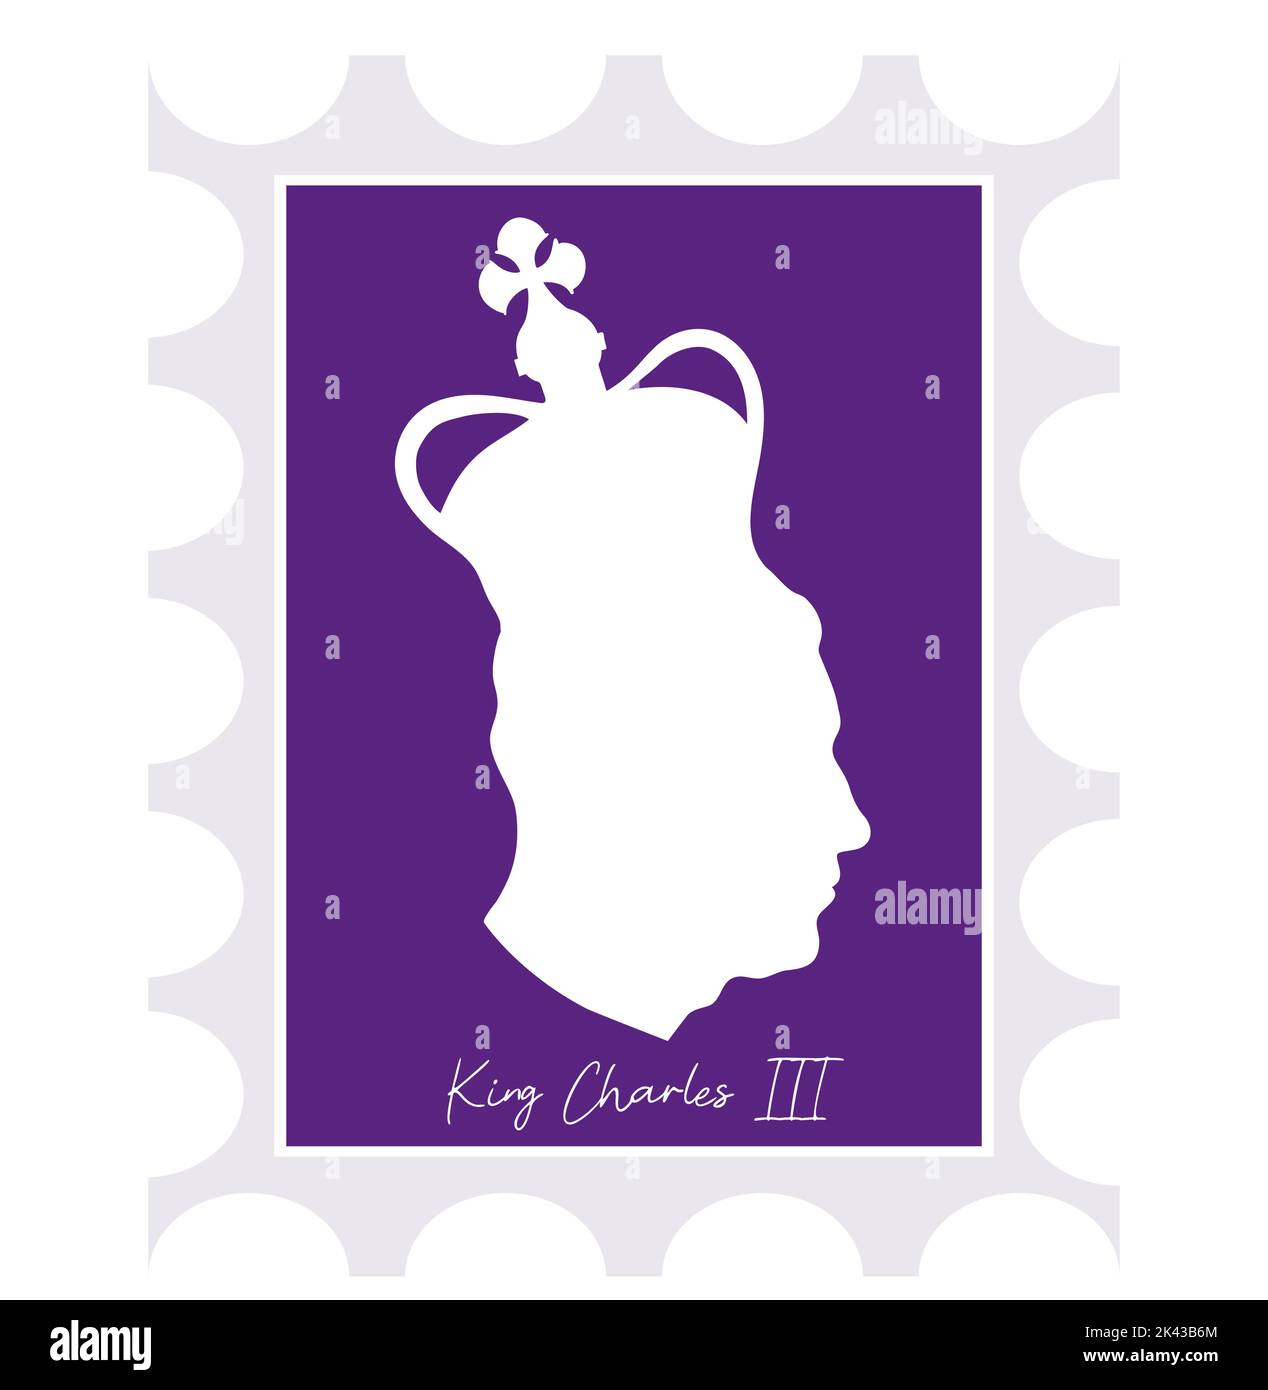 Postage stamp with silhouette of King Charles III. British monarch in Crown. Head side view profile silhouette Prince of Wales. Vector illustration, l Stock Vector